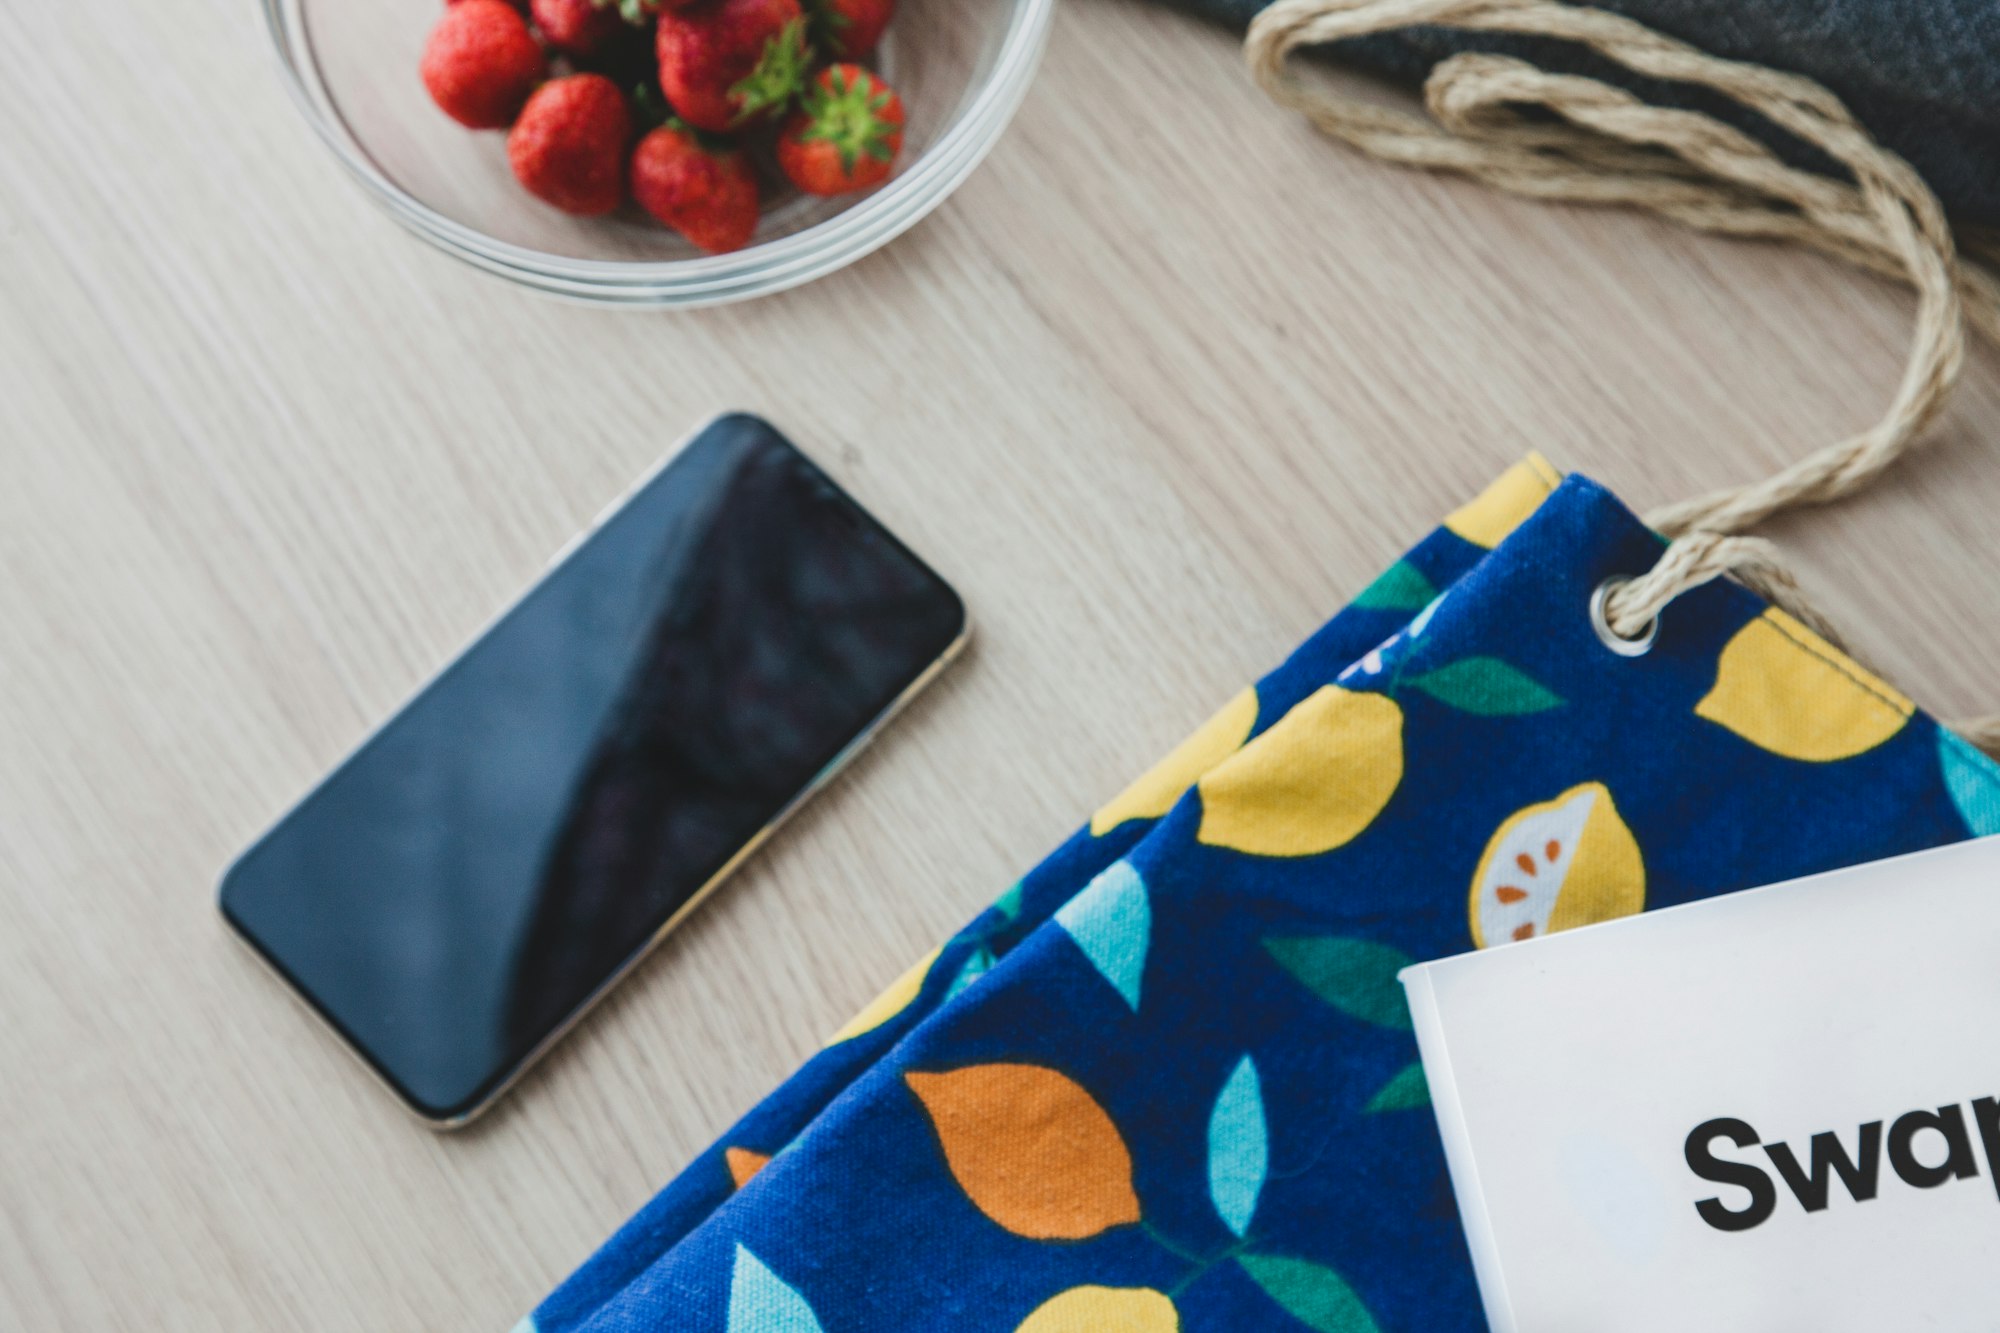 Smartphone on a breakfast table. Background is light wood. Strawberries strike with their red color. Lemons on the texture of a bag. Cozy mood.